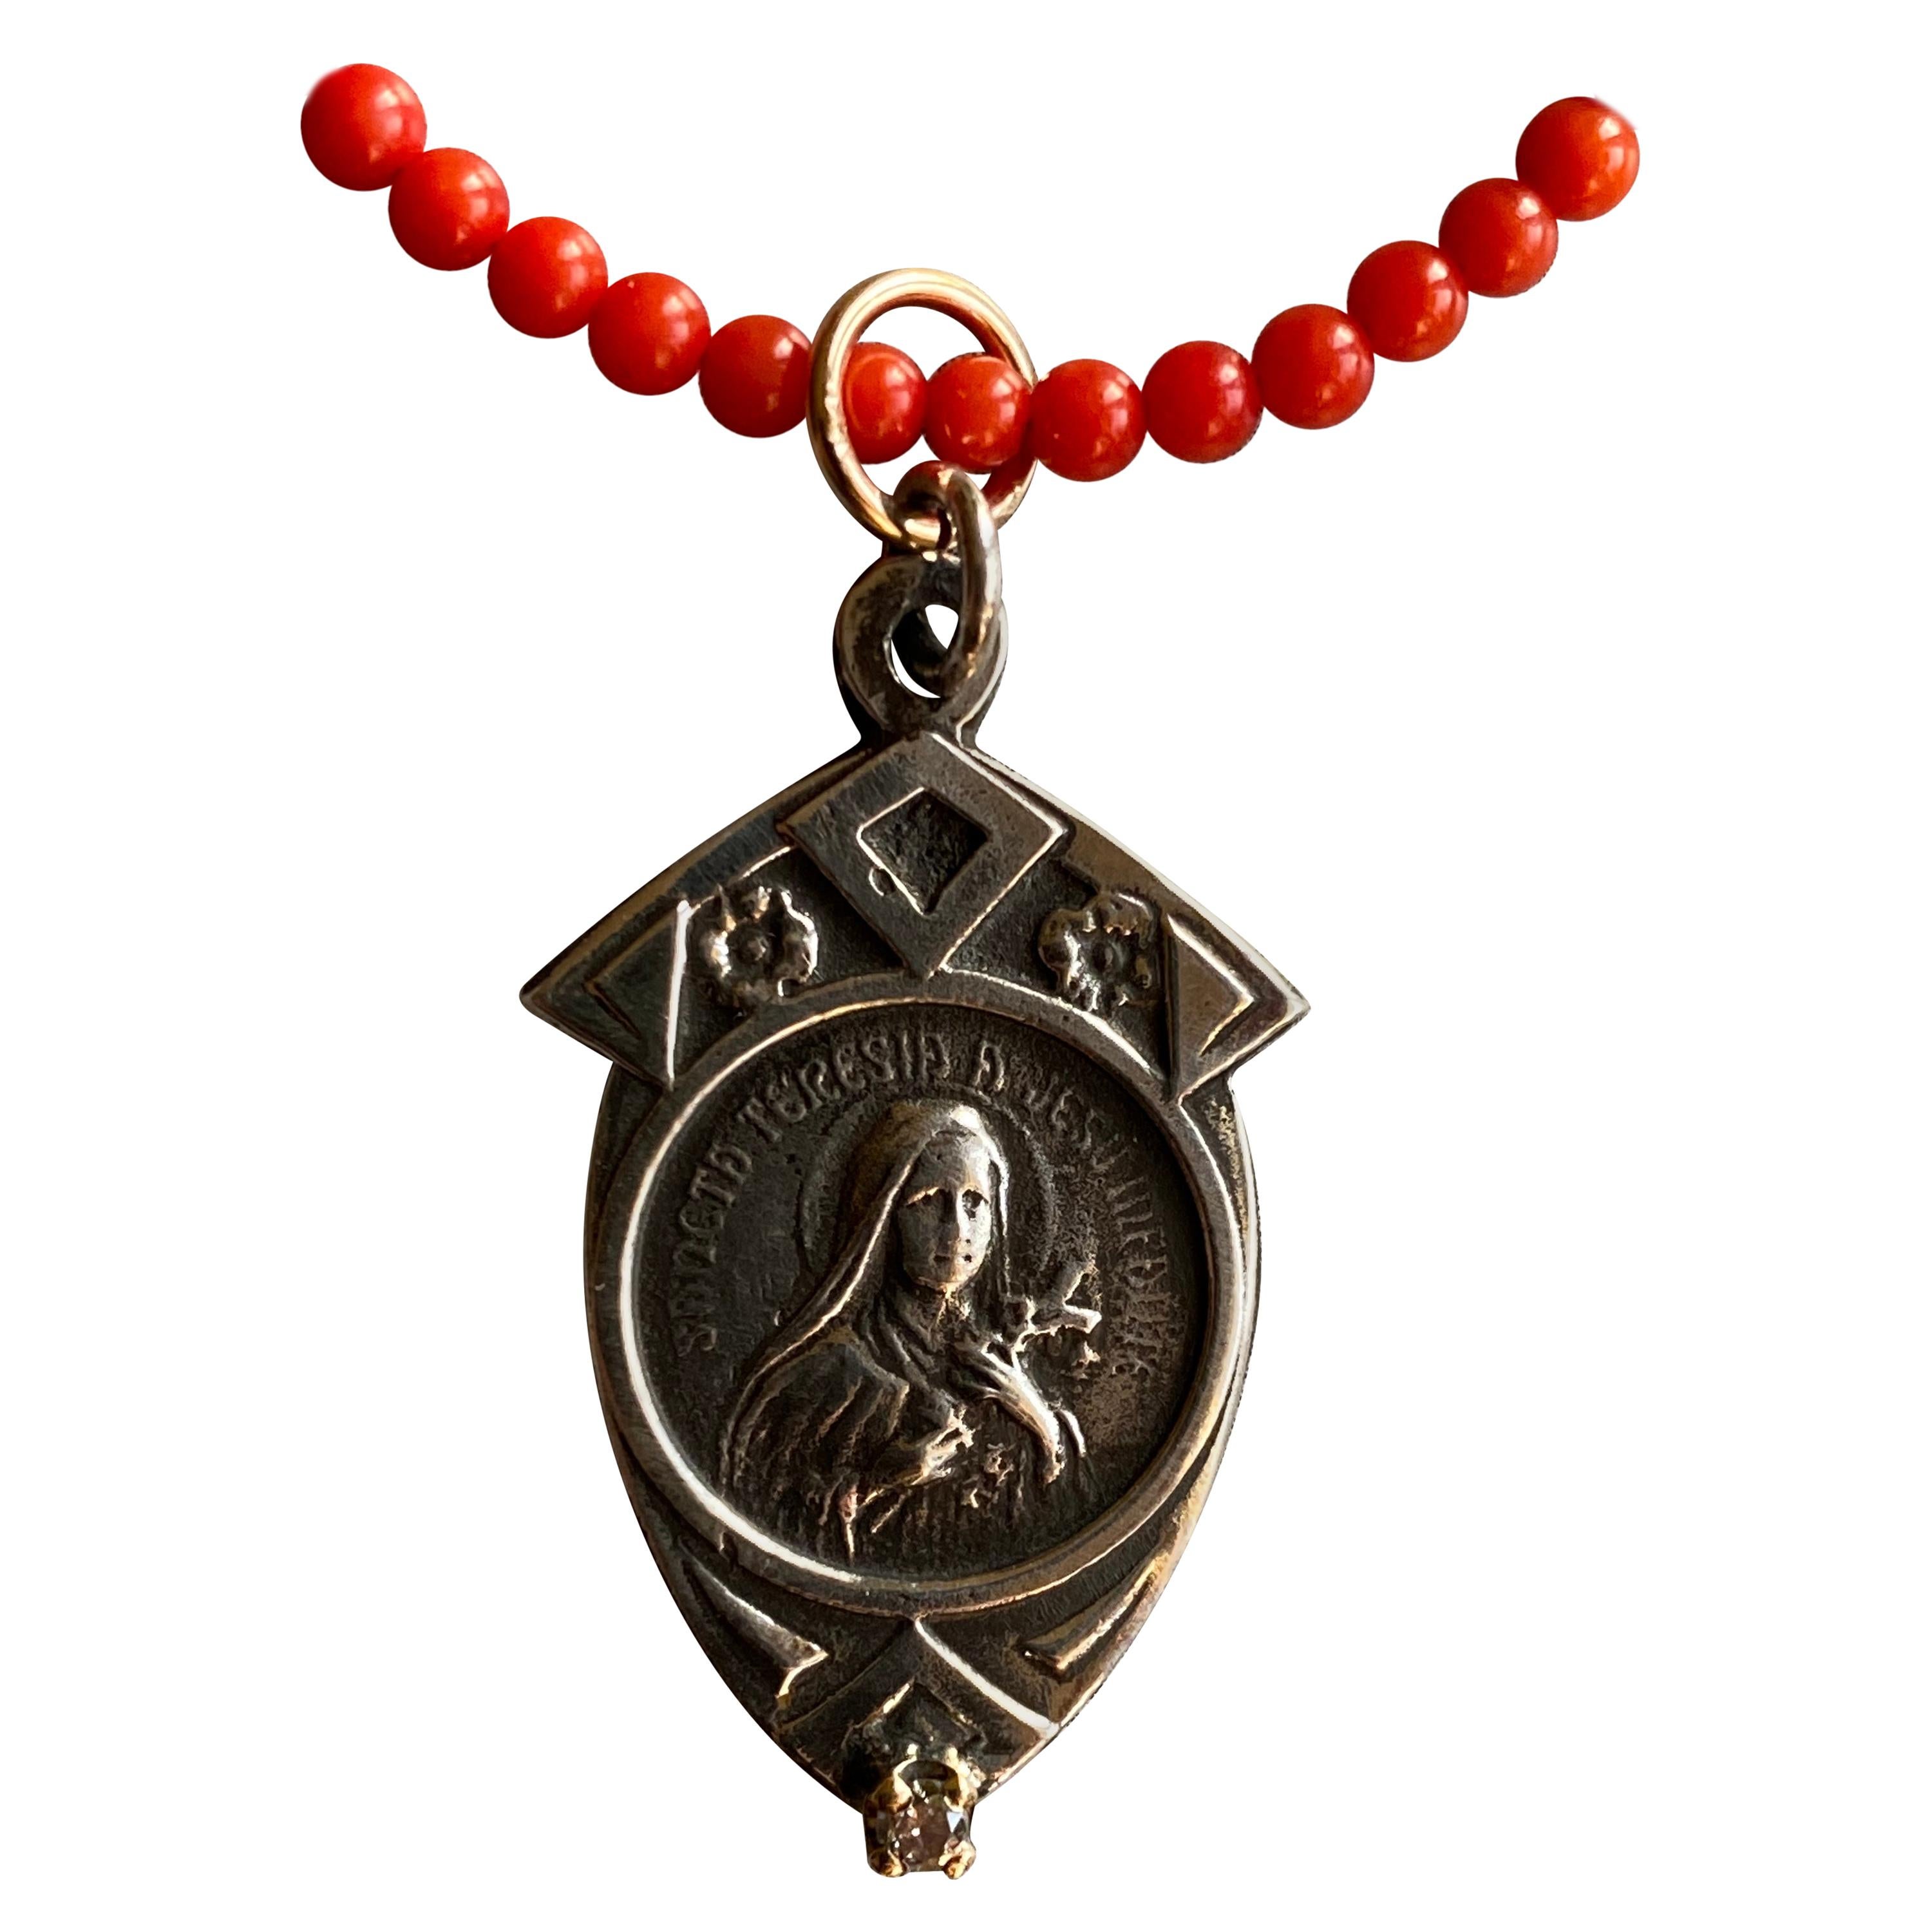 White Diamond Virgin Mary Medal silver Red Coral Bead Choker Necklace J Dauphin